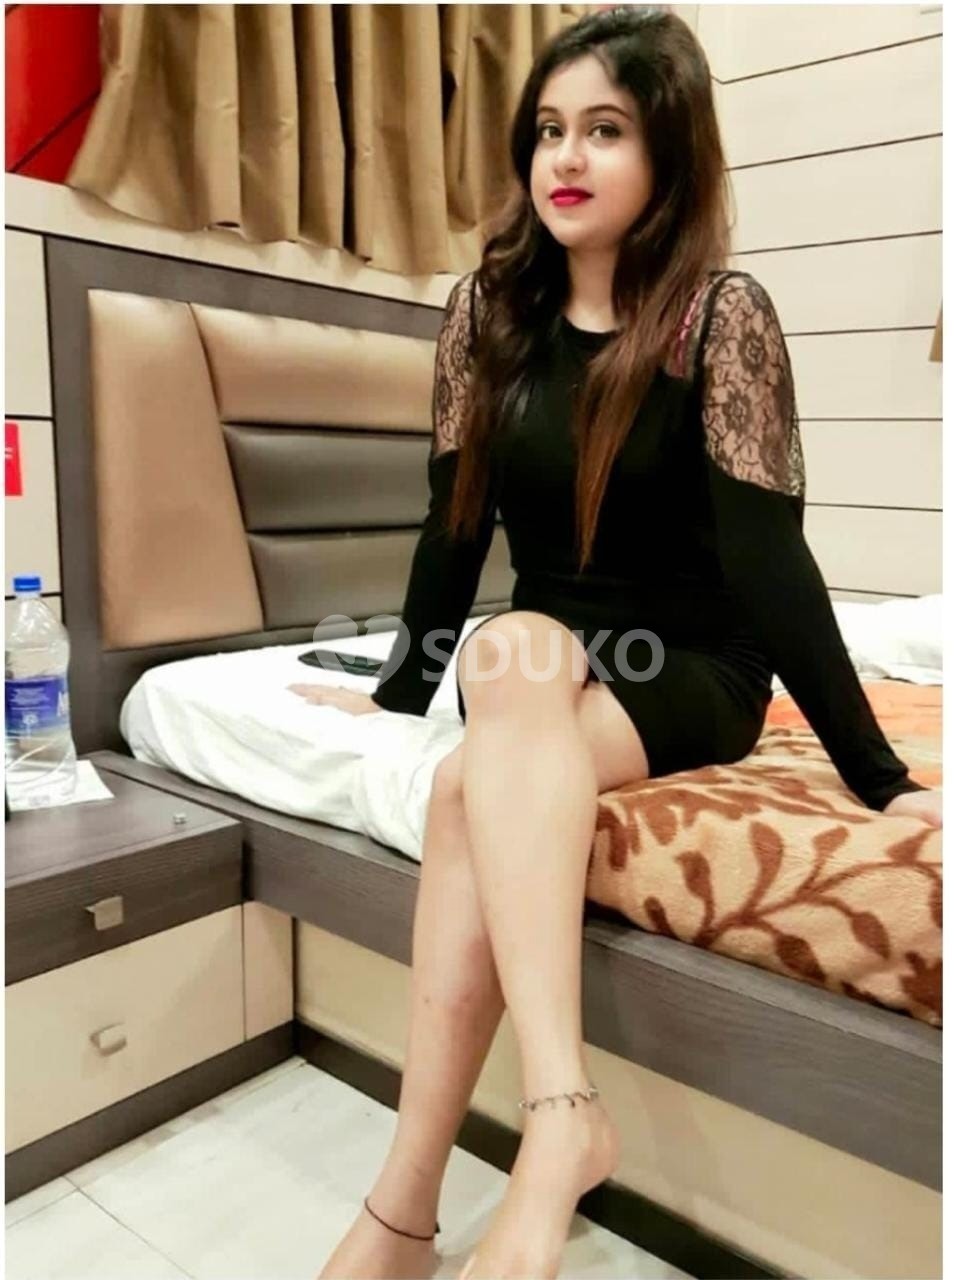 Greater Noida vip call girl 24x7 service available.. .100% SAFE AND SECURE TODAY LOW PRICE UNLIMITED ENJOY HOT COLLEGE G